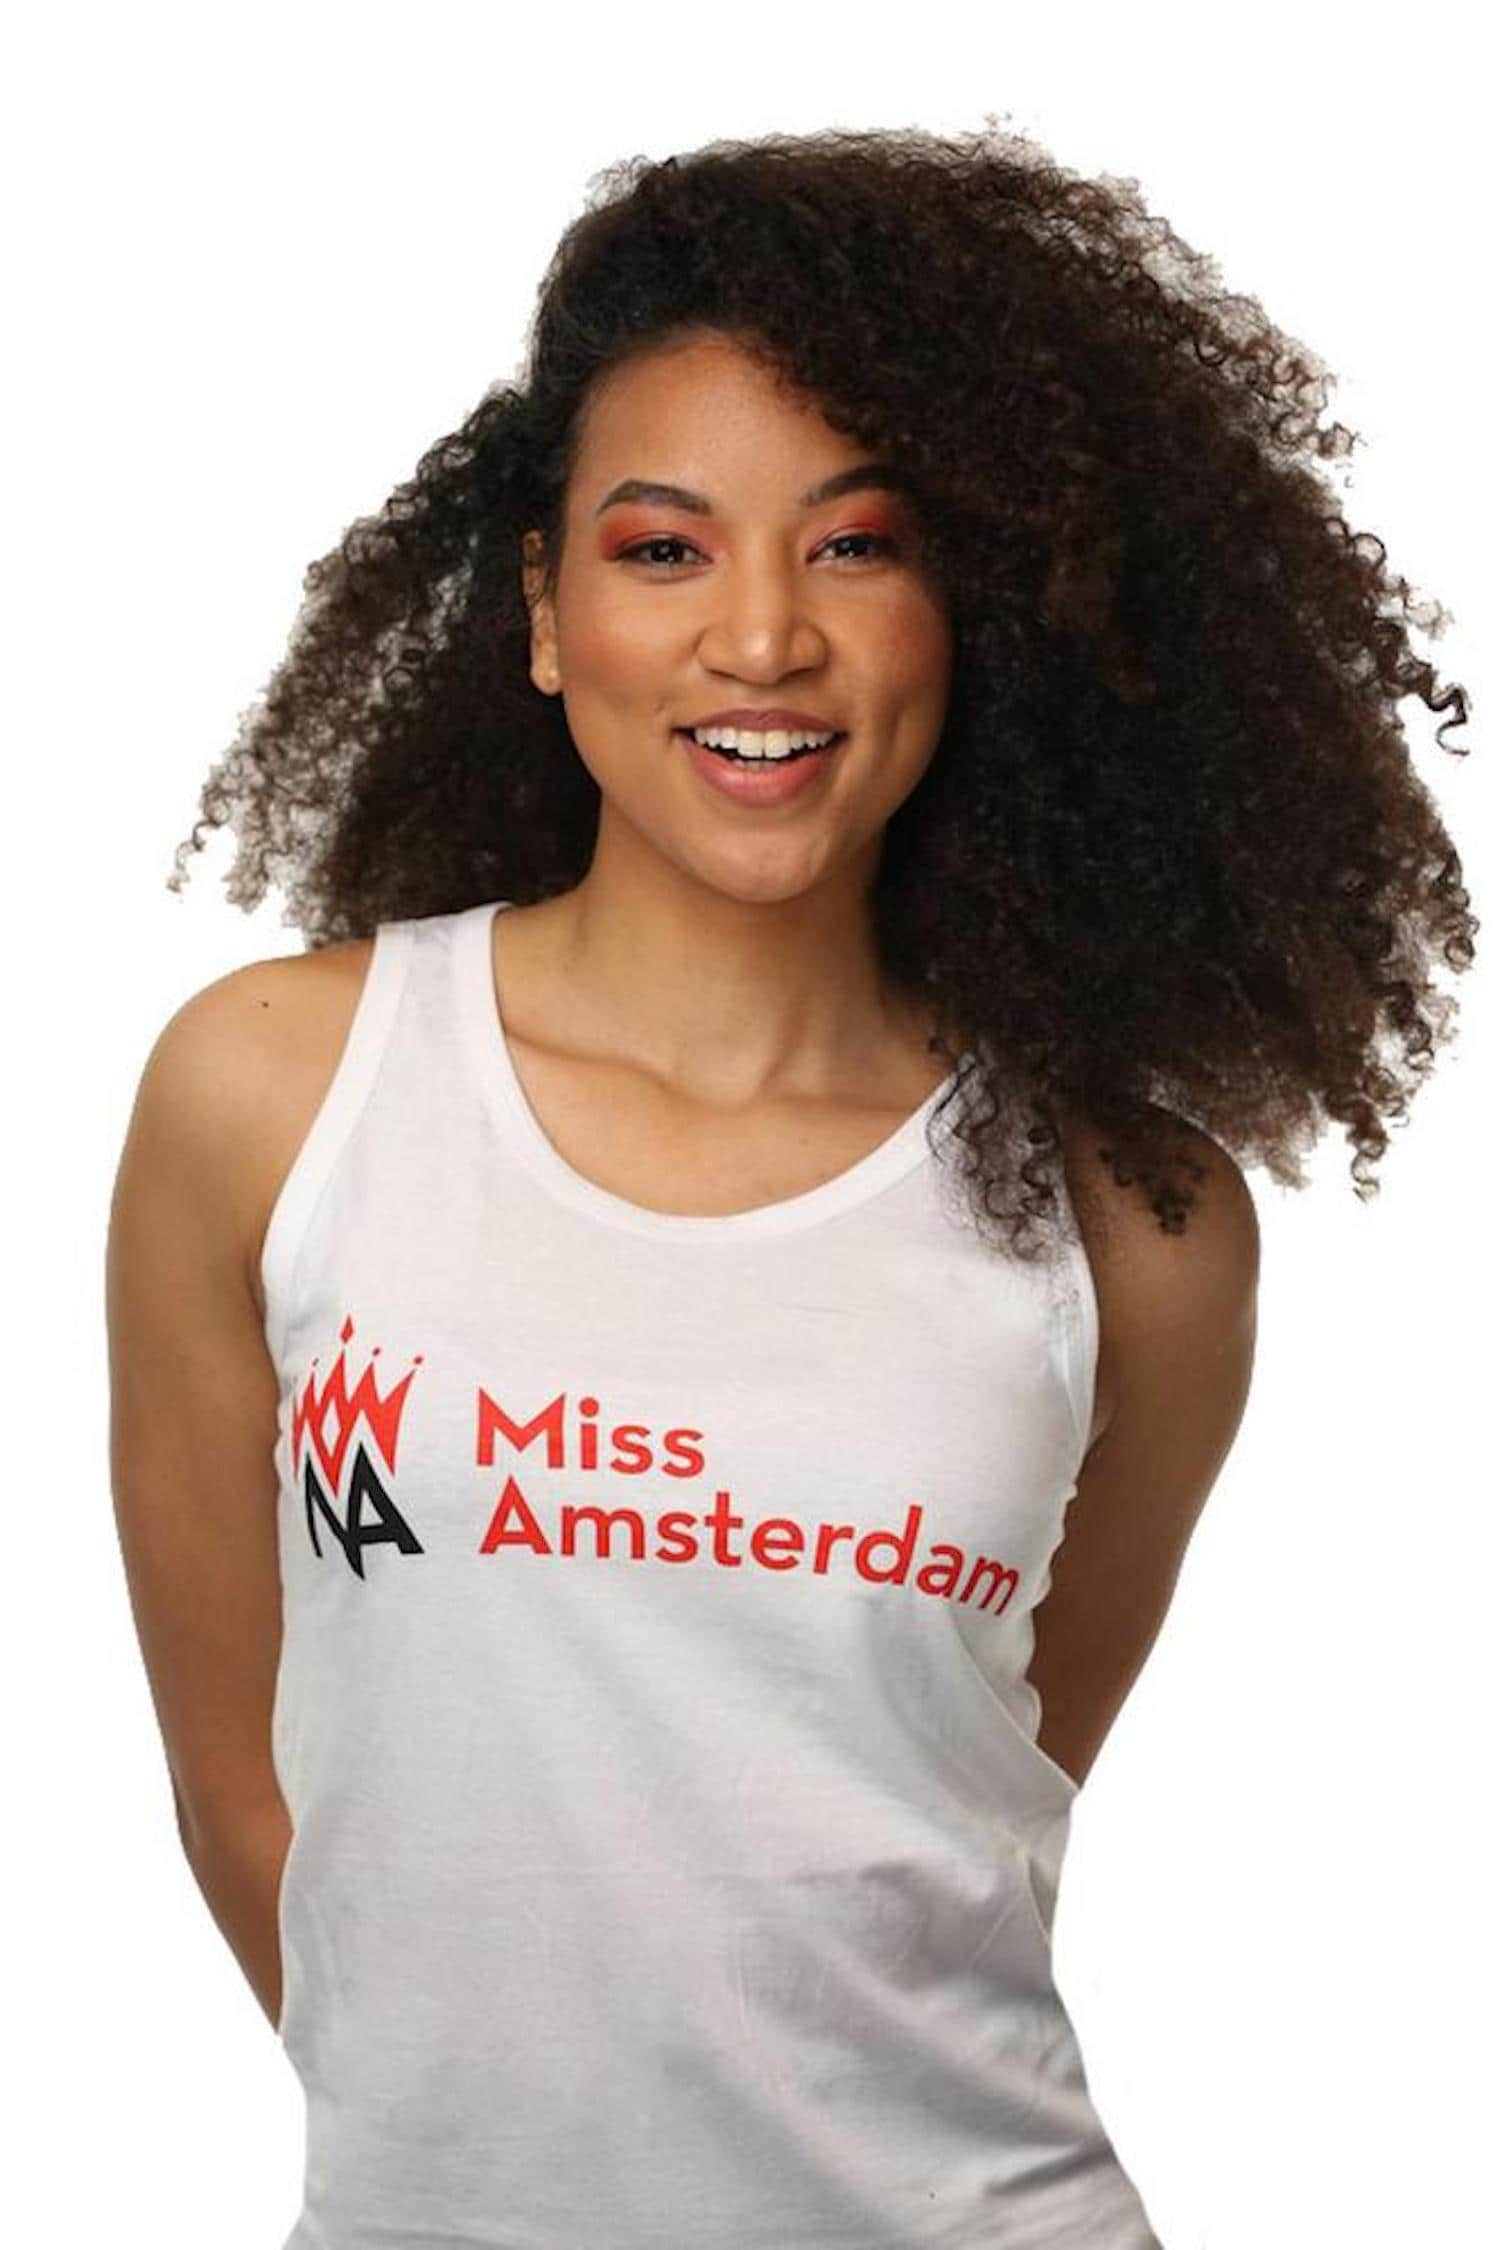 Janice Babel is Miss Amsterdam